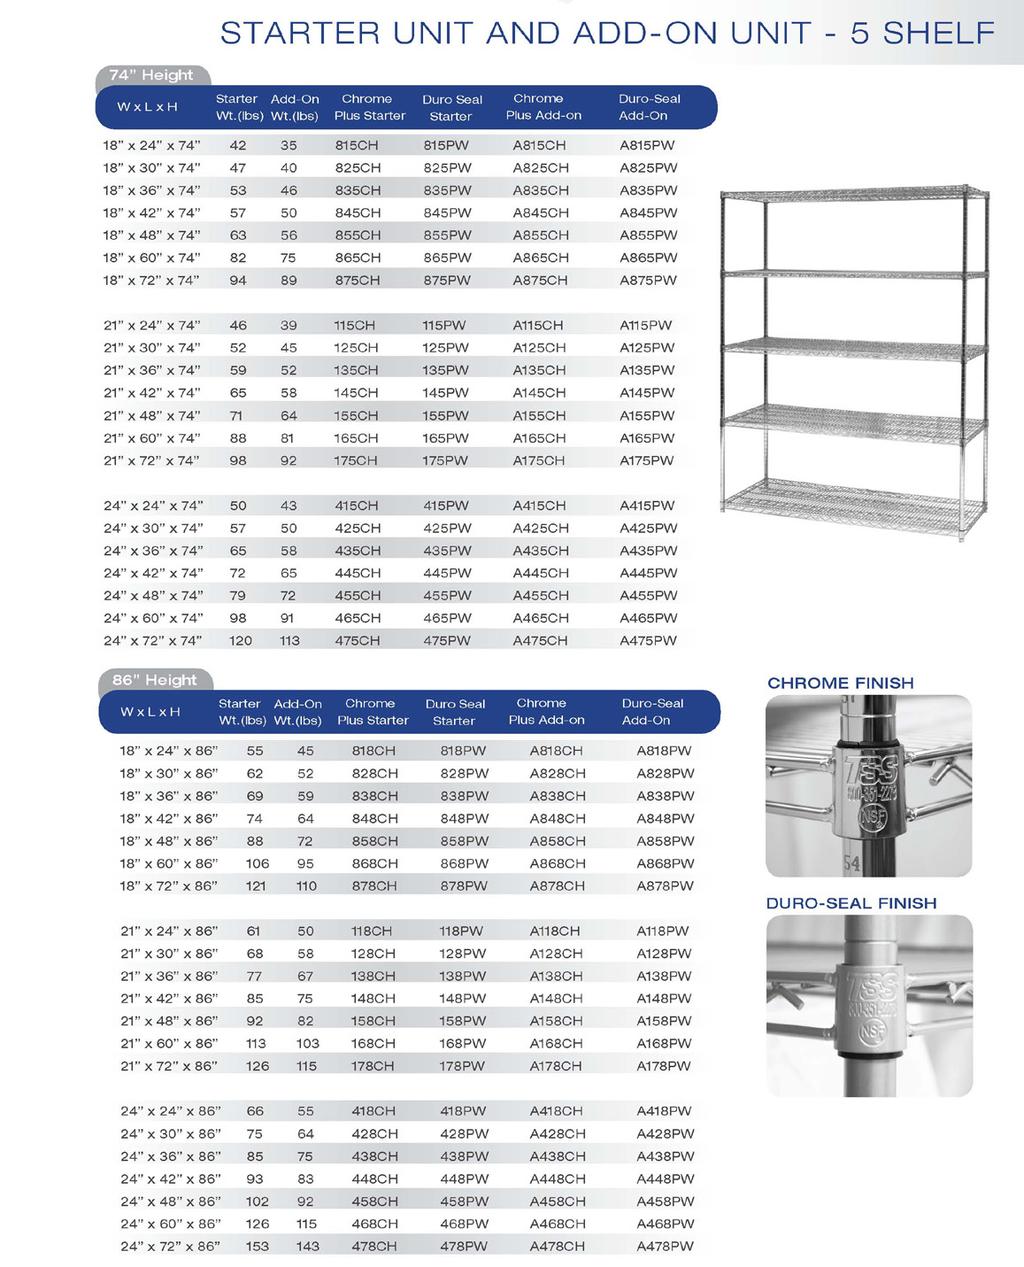 See page 2 for Spacesaver part number